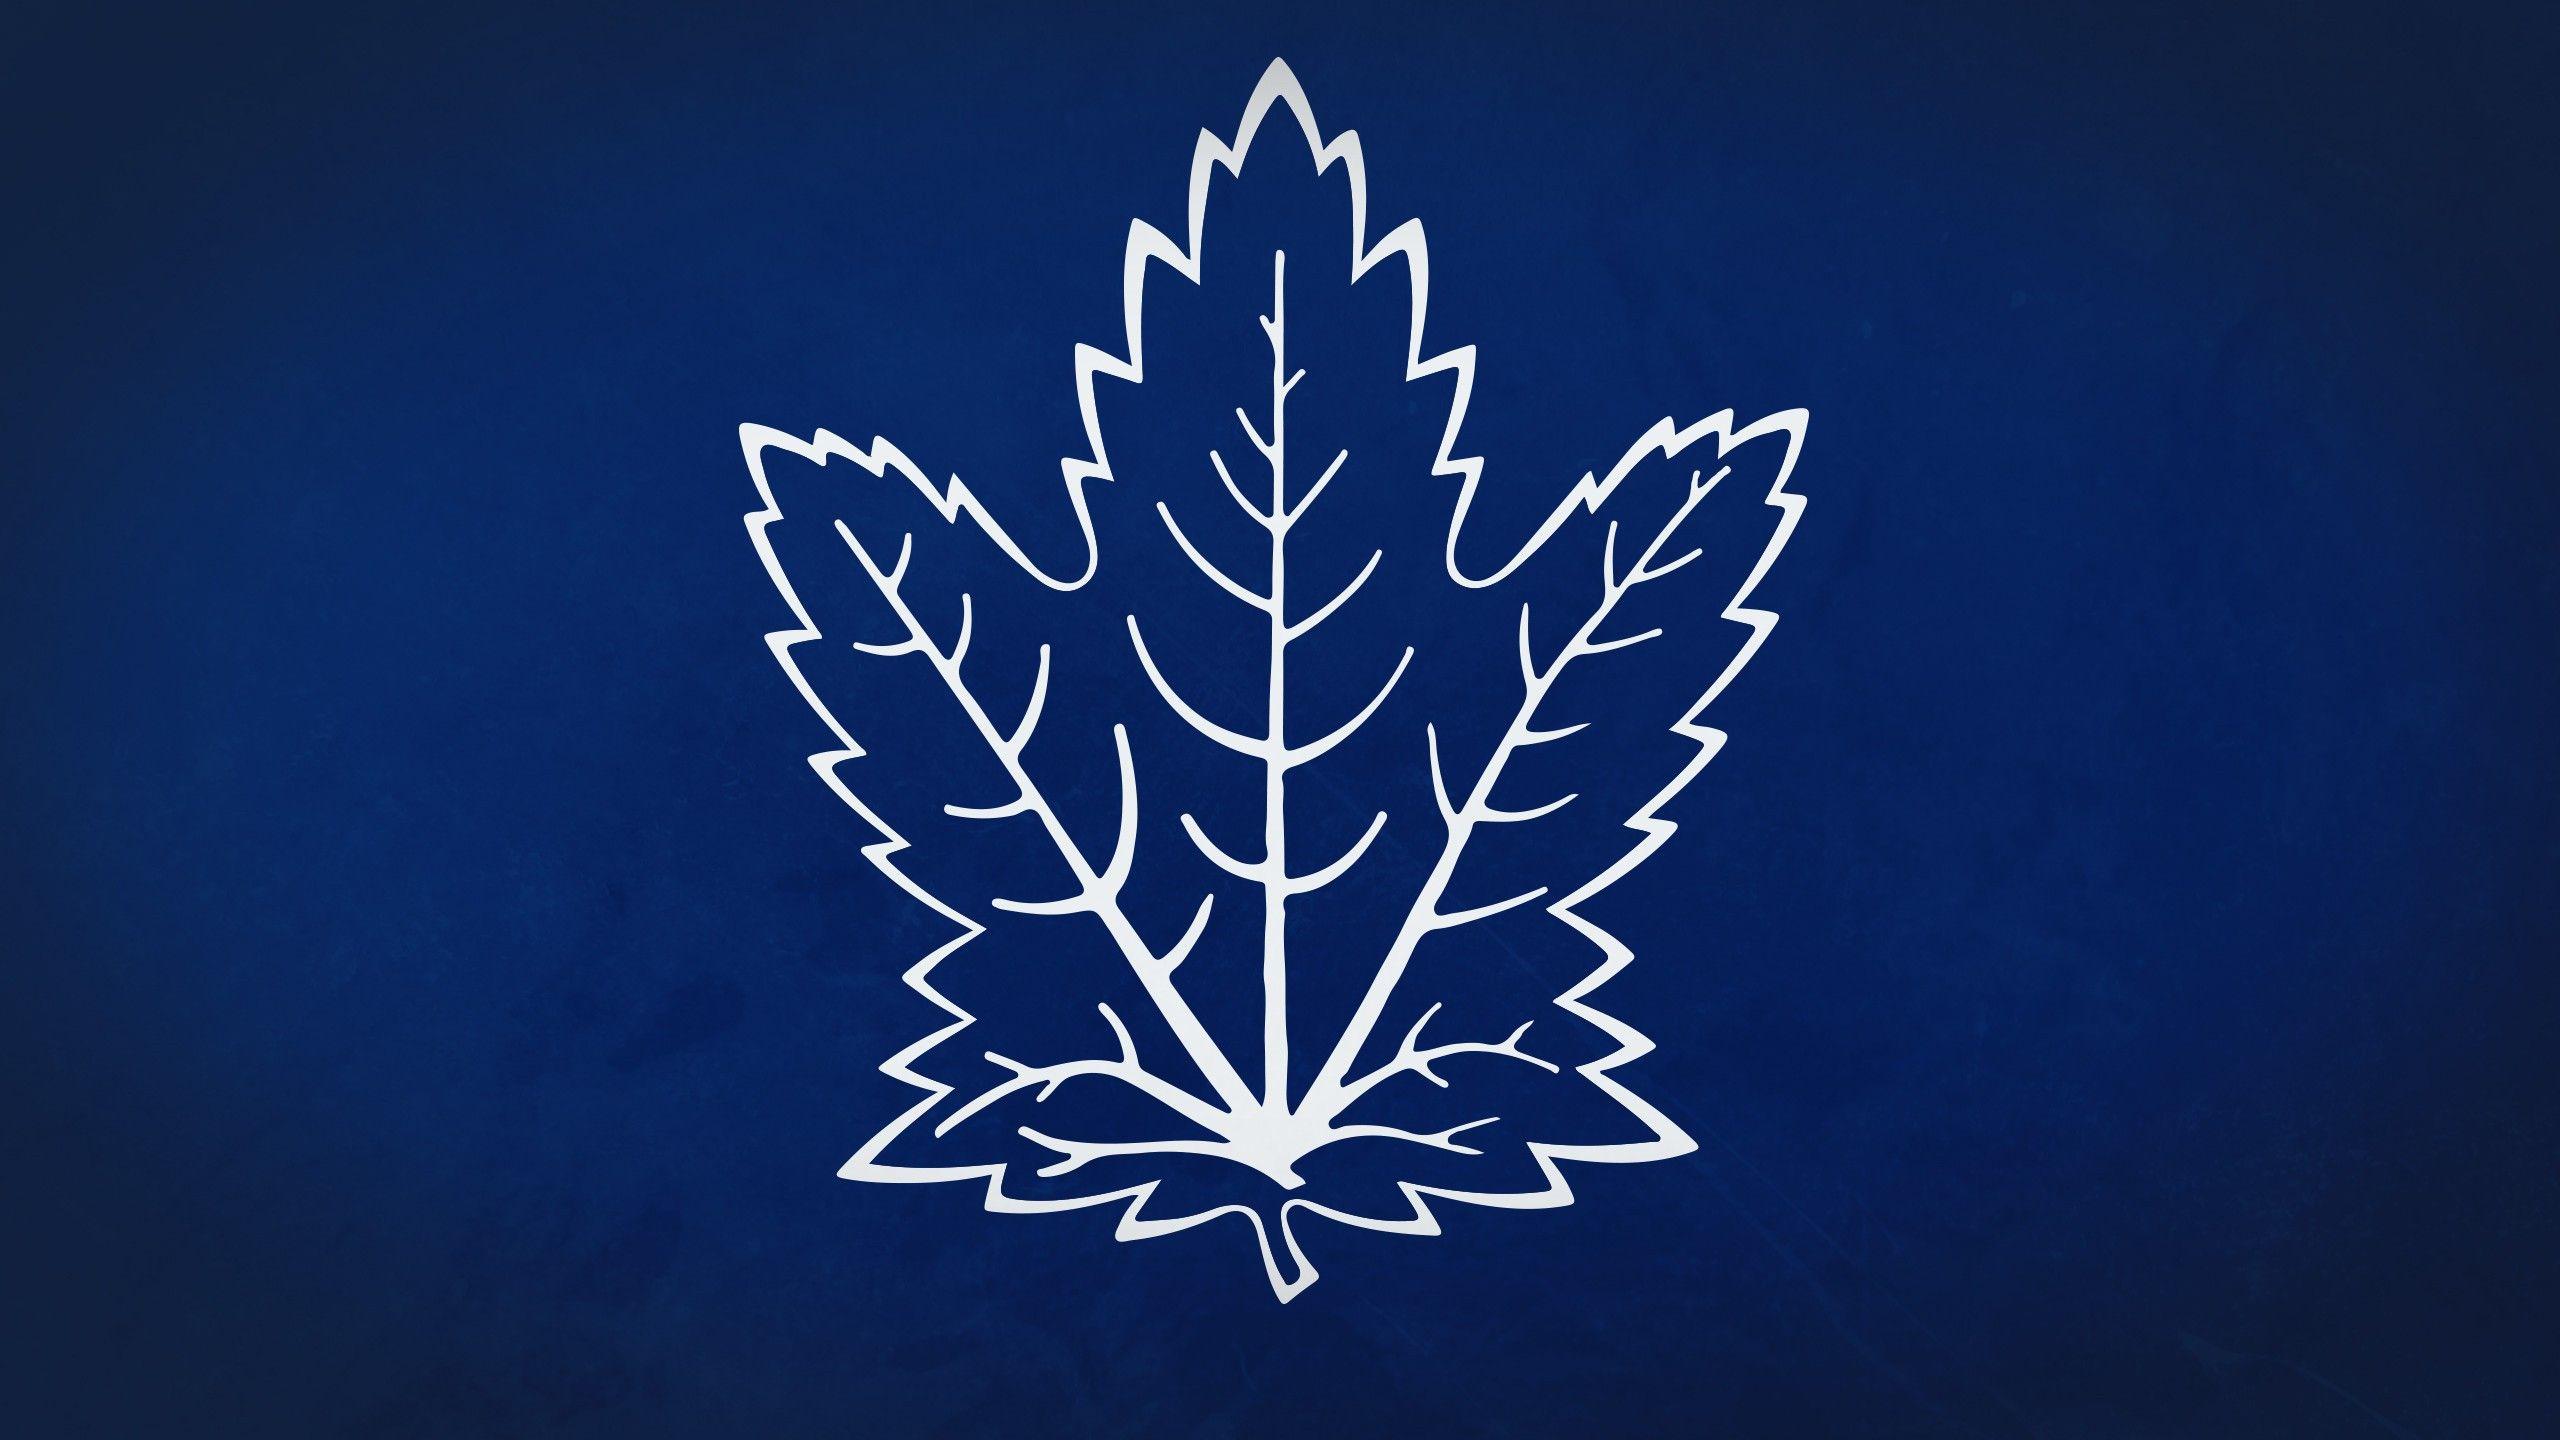 Toronto Maple Leafs Backgrounds Wallpaper Cave